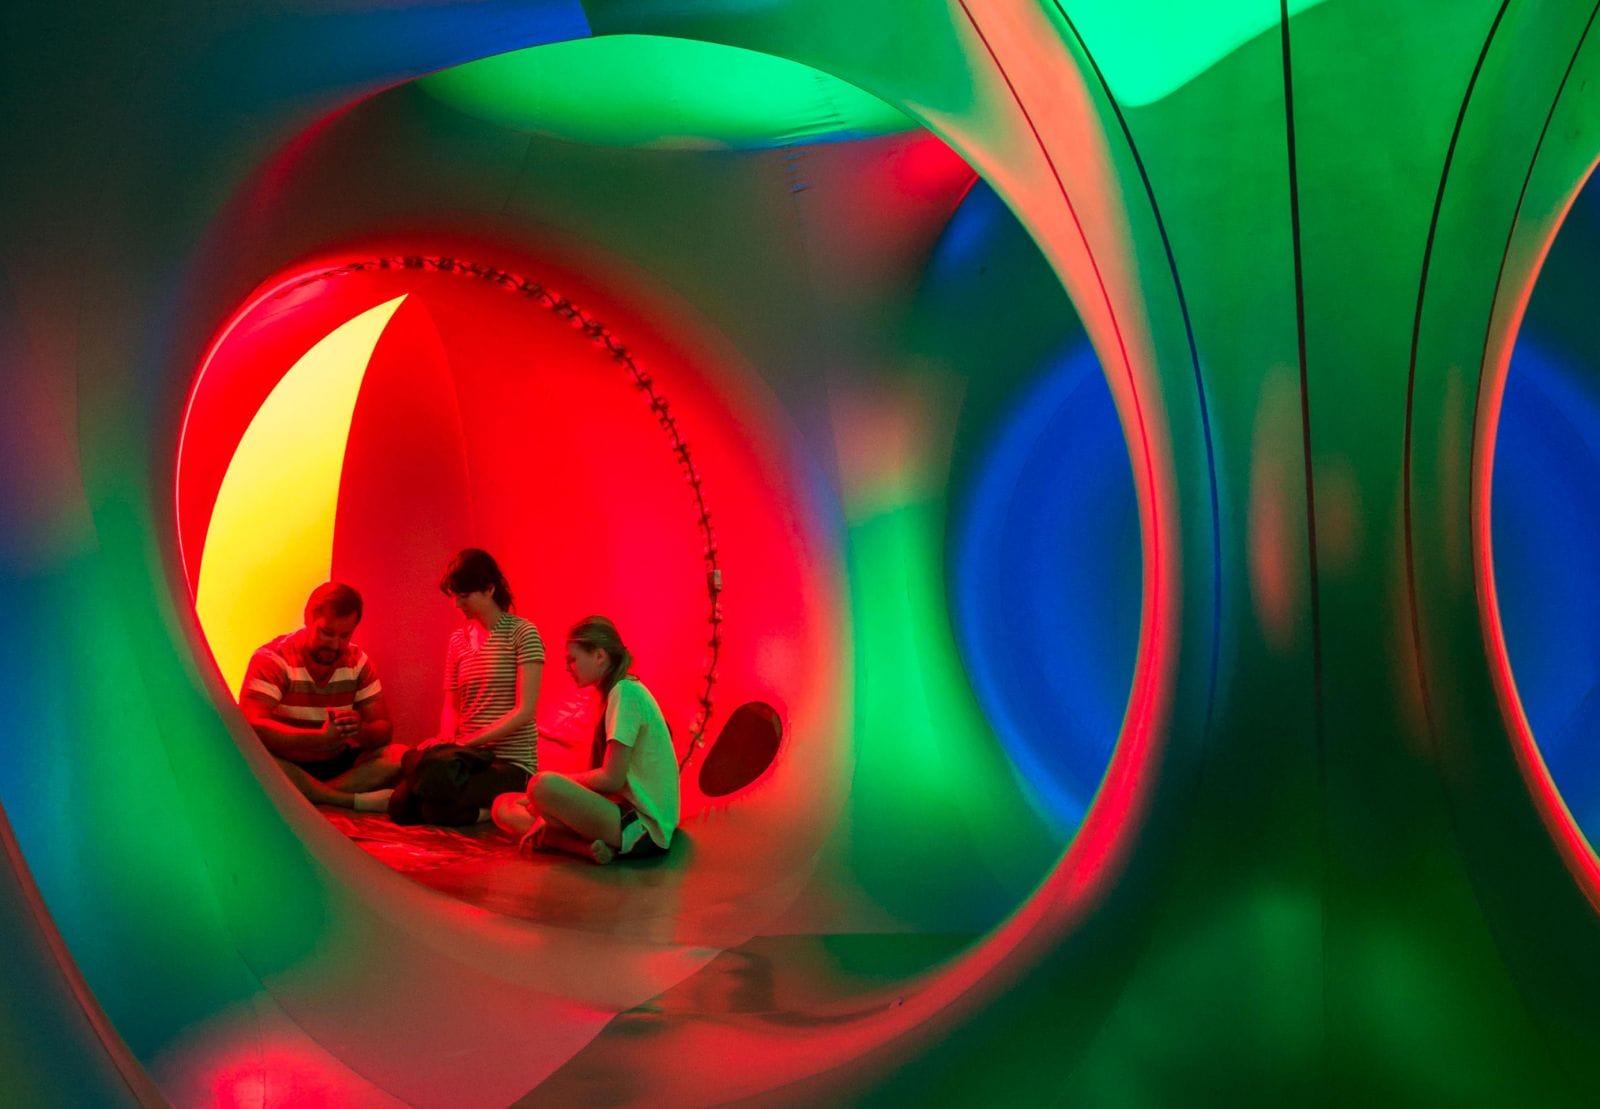 A man, woman and teenage girl sit and talk in a small bright red dome in the luminarium. They are surrounded by towers and walls that glow bright green.